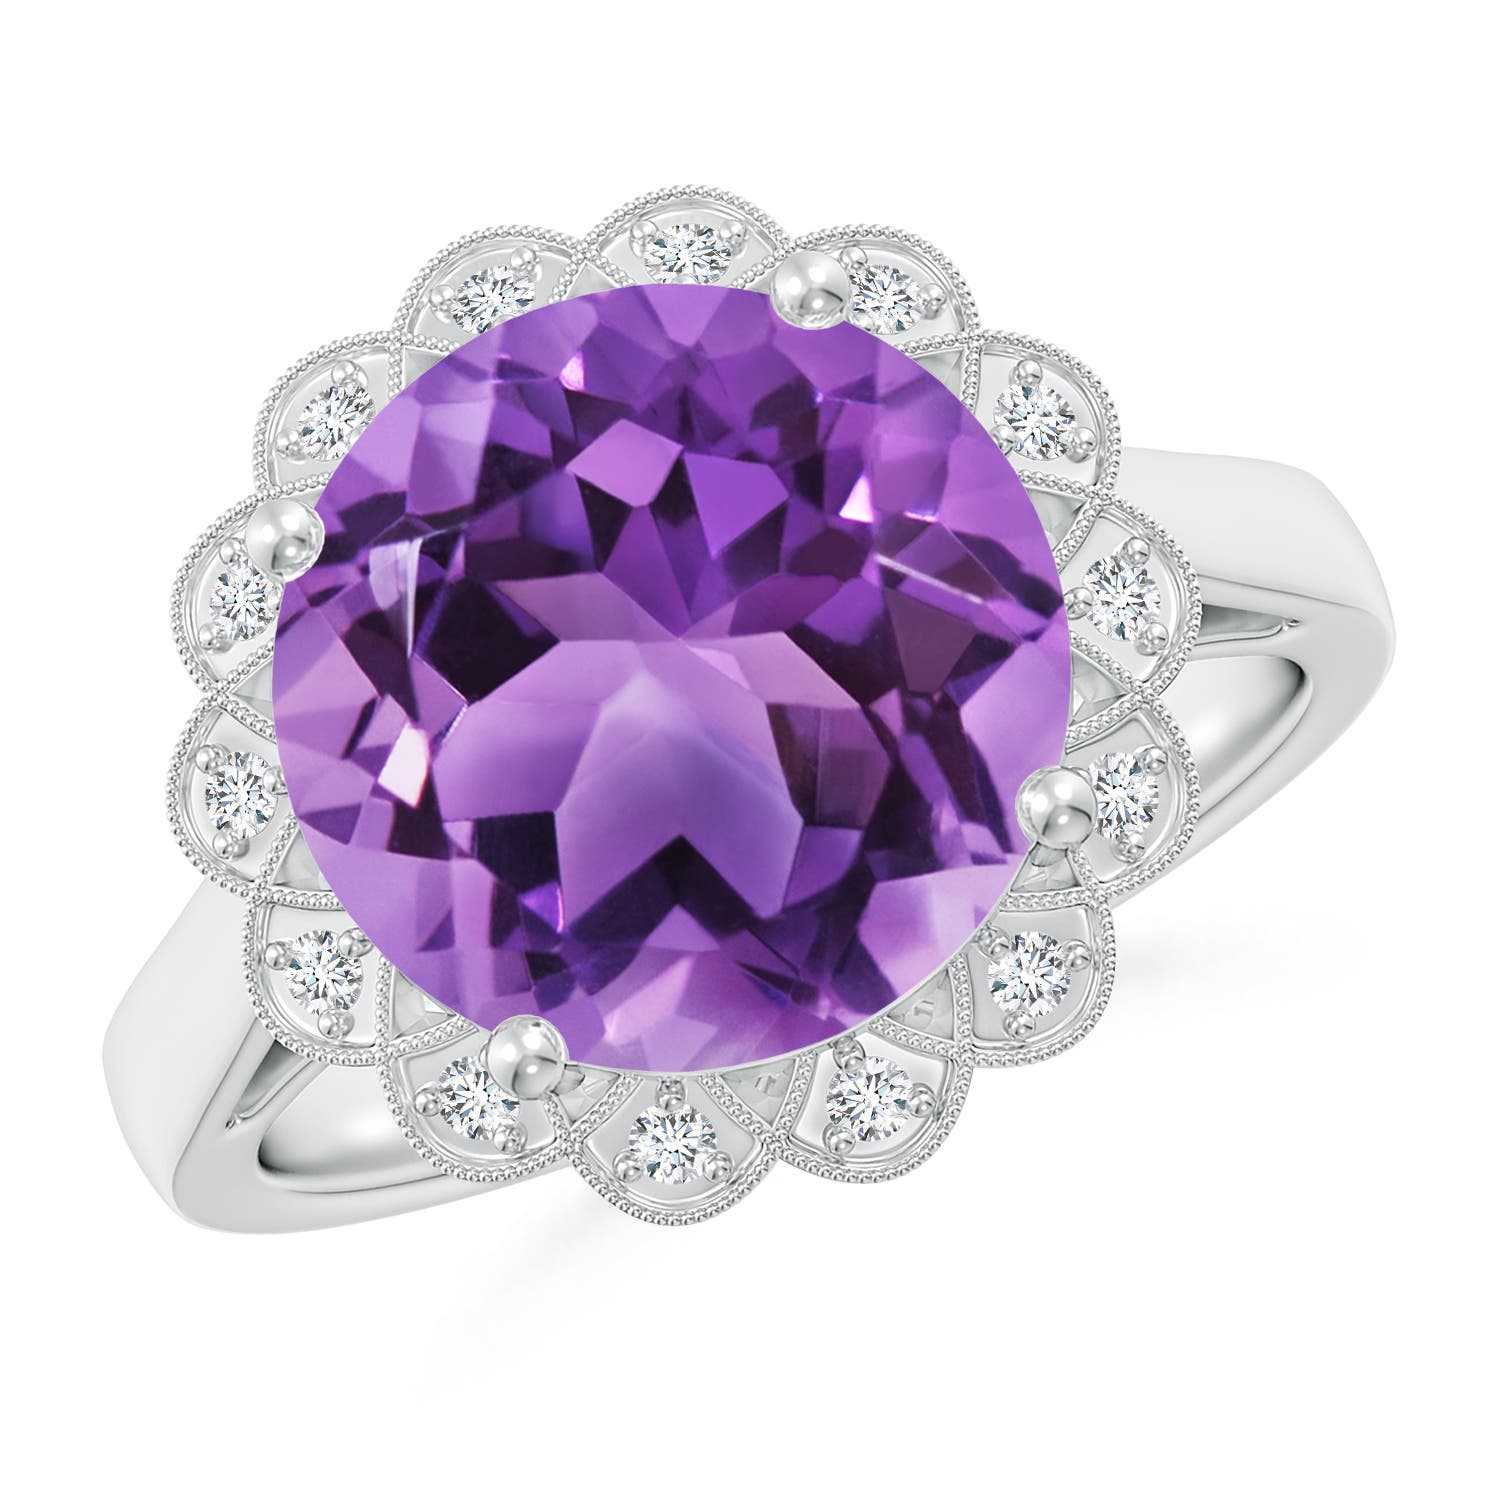 AA- Amethyst / 4.86 CT / 14 KT White Gold